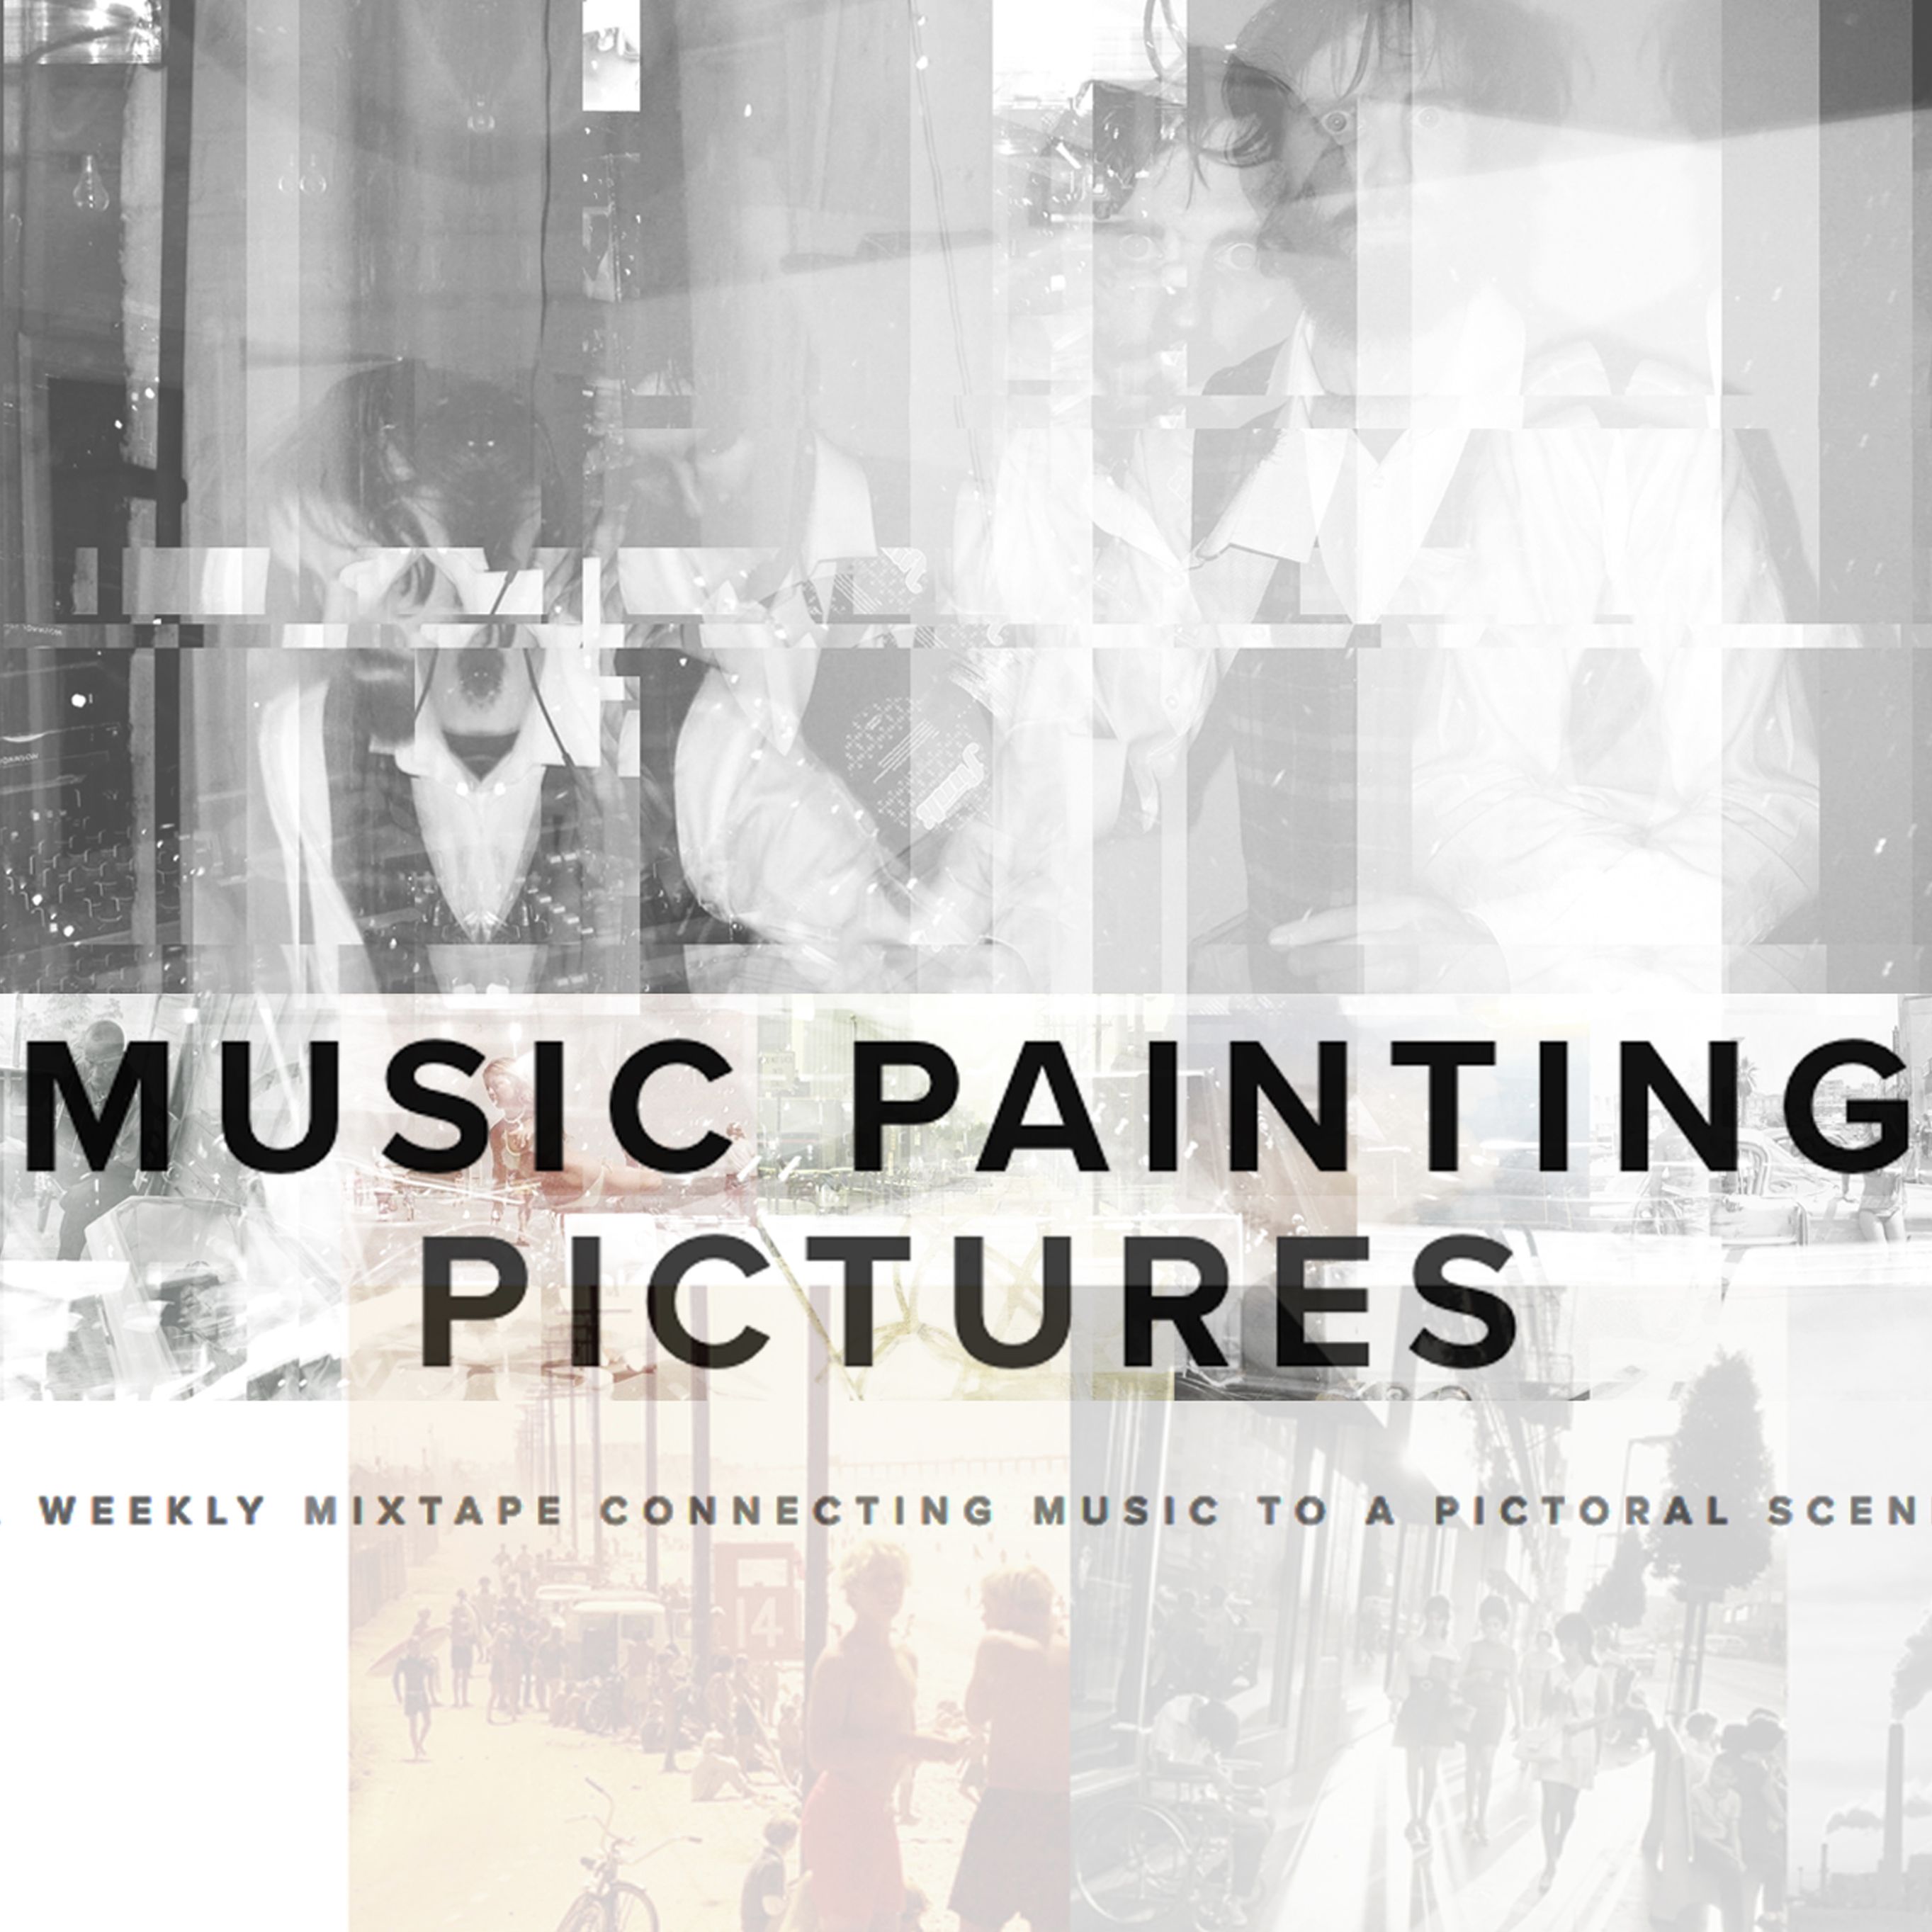 Music Painting Pictures